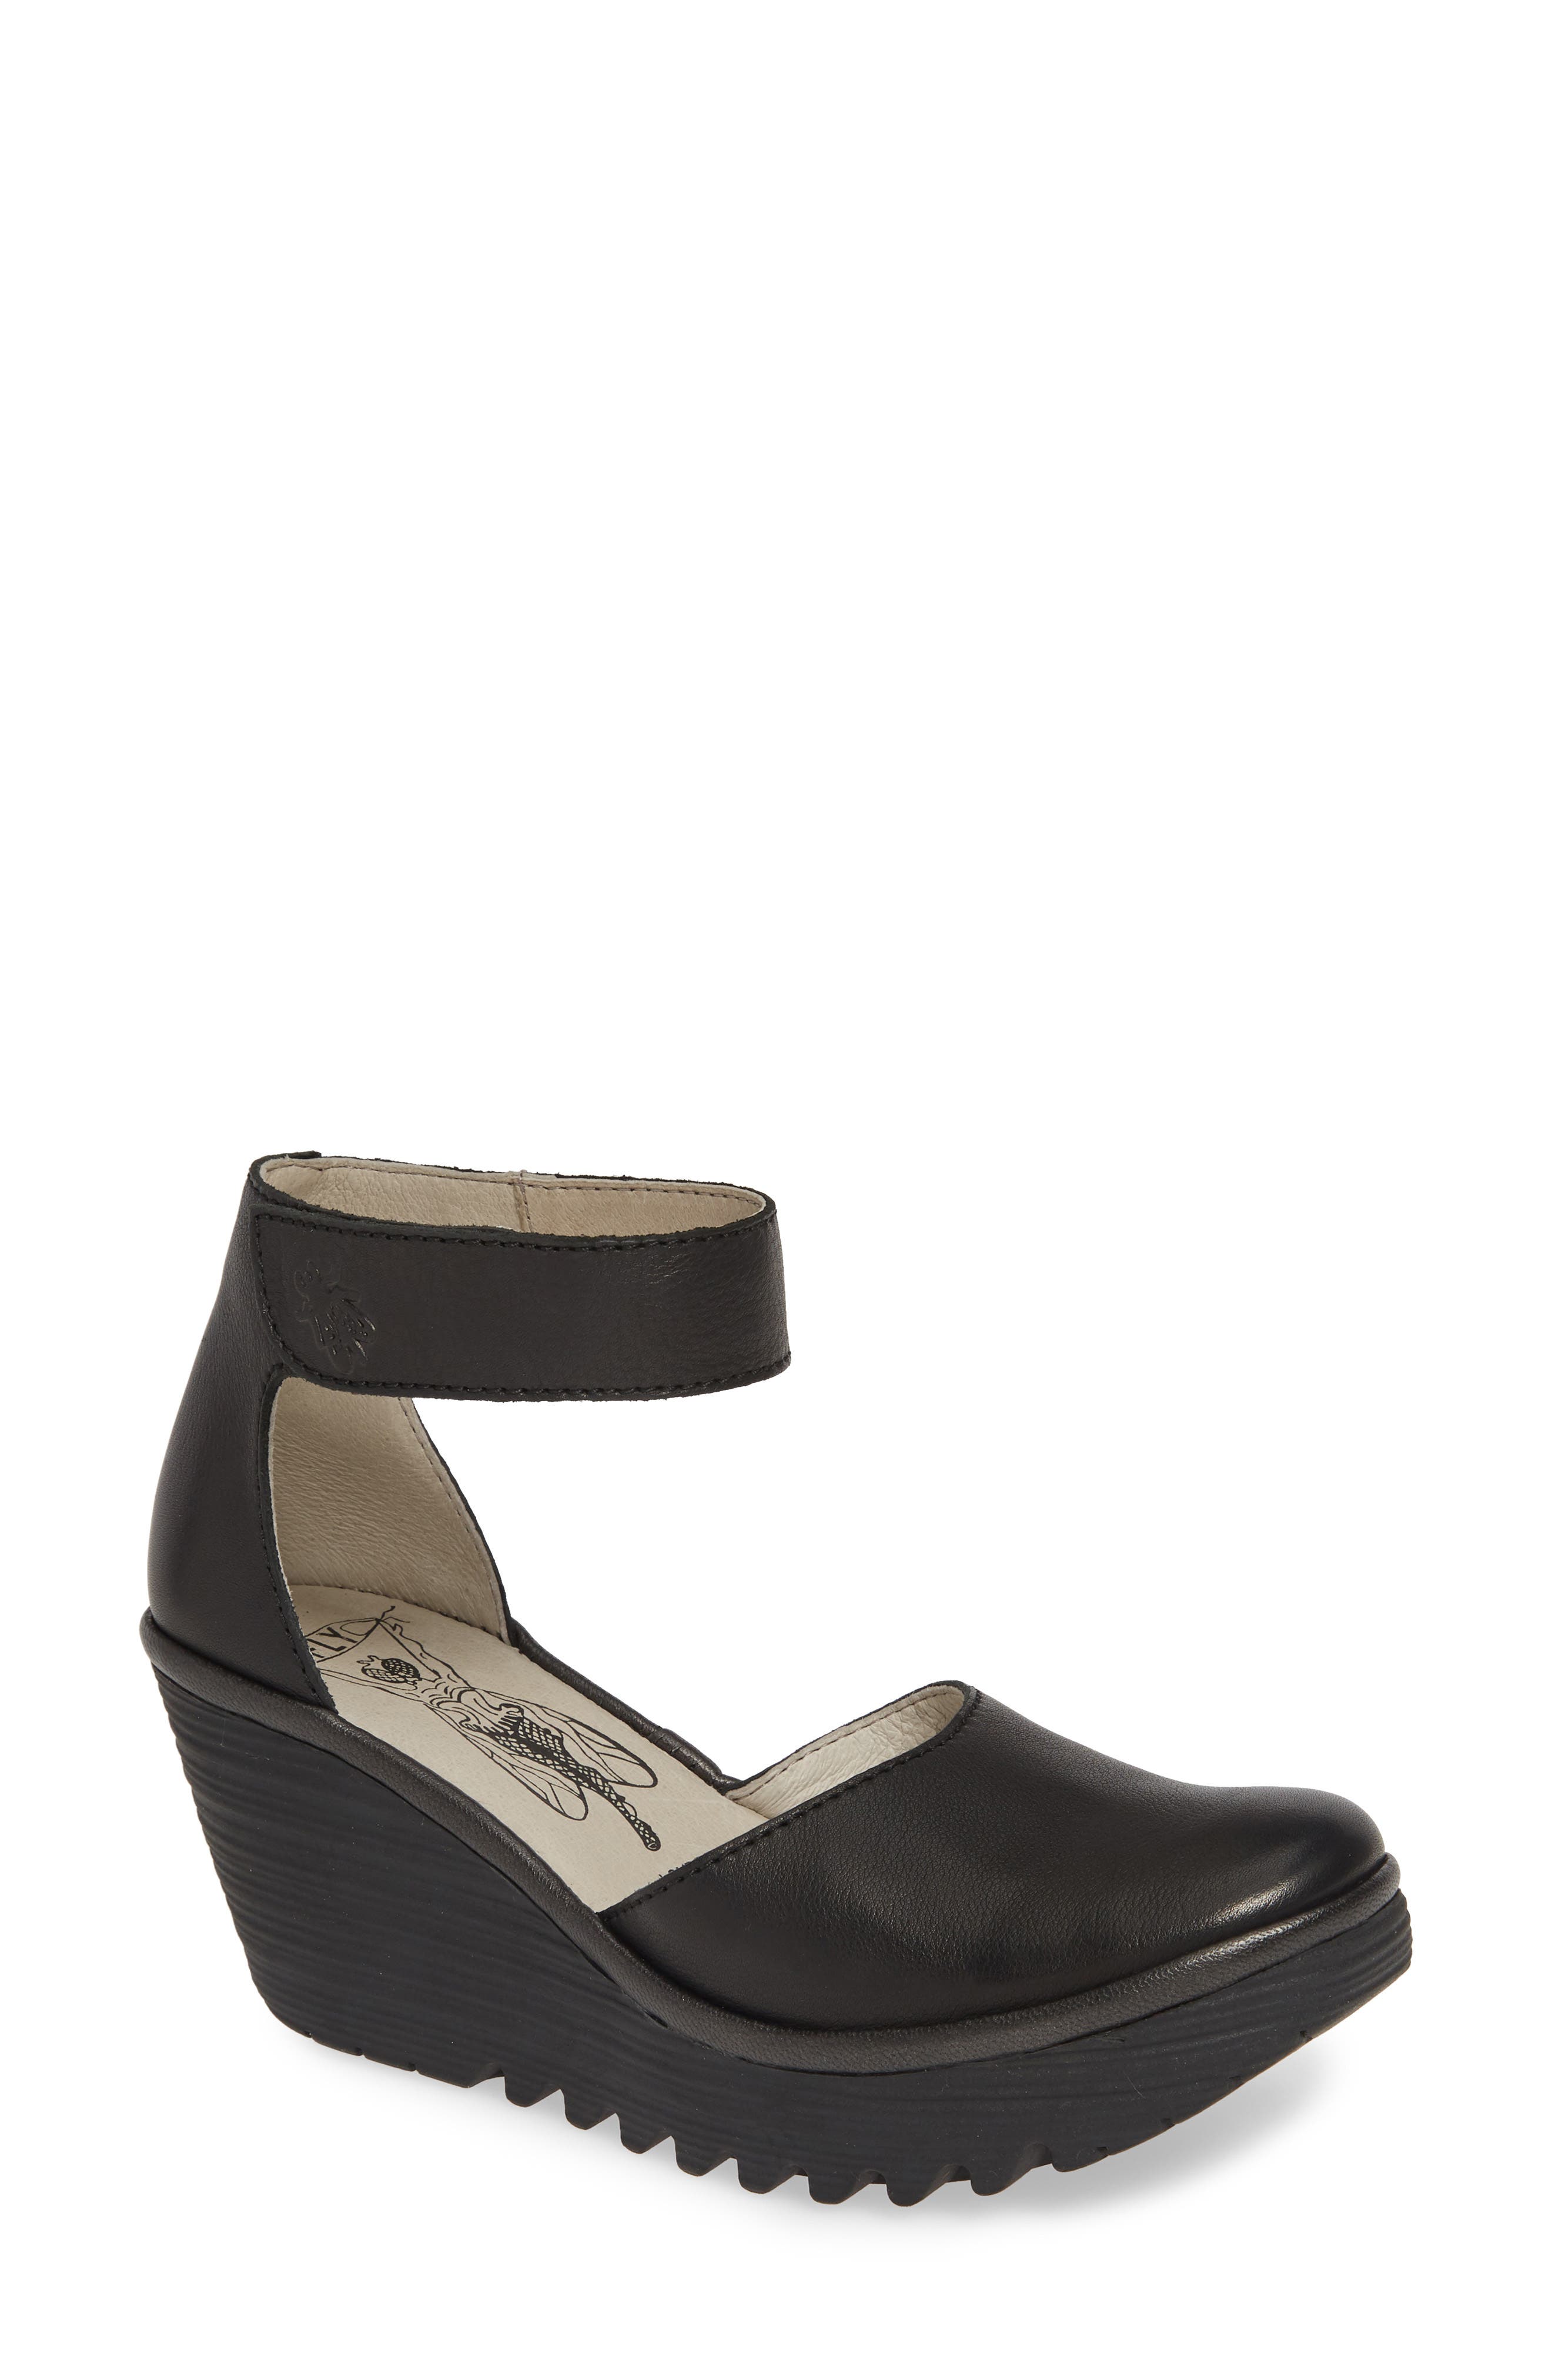 Fly London Yand Wedge Pump | Nordstrom